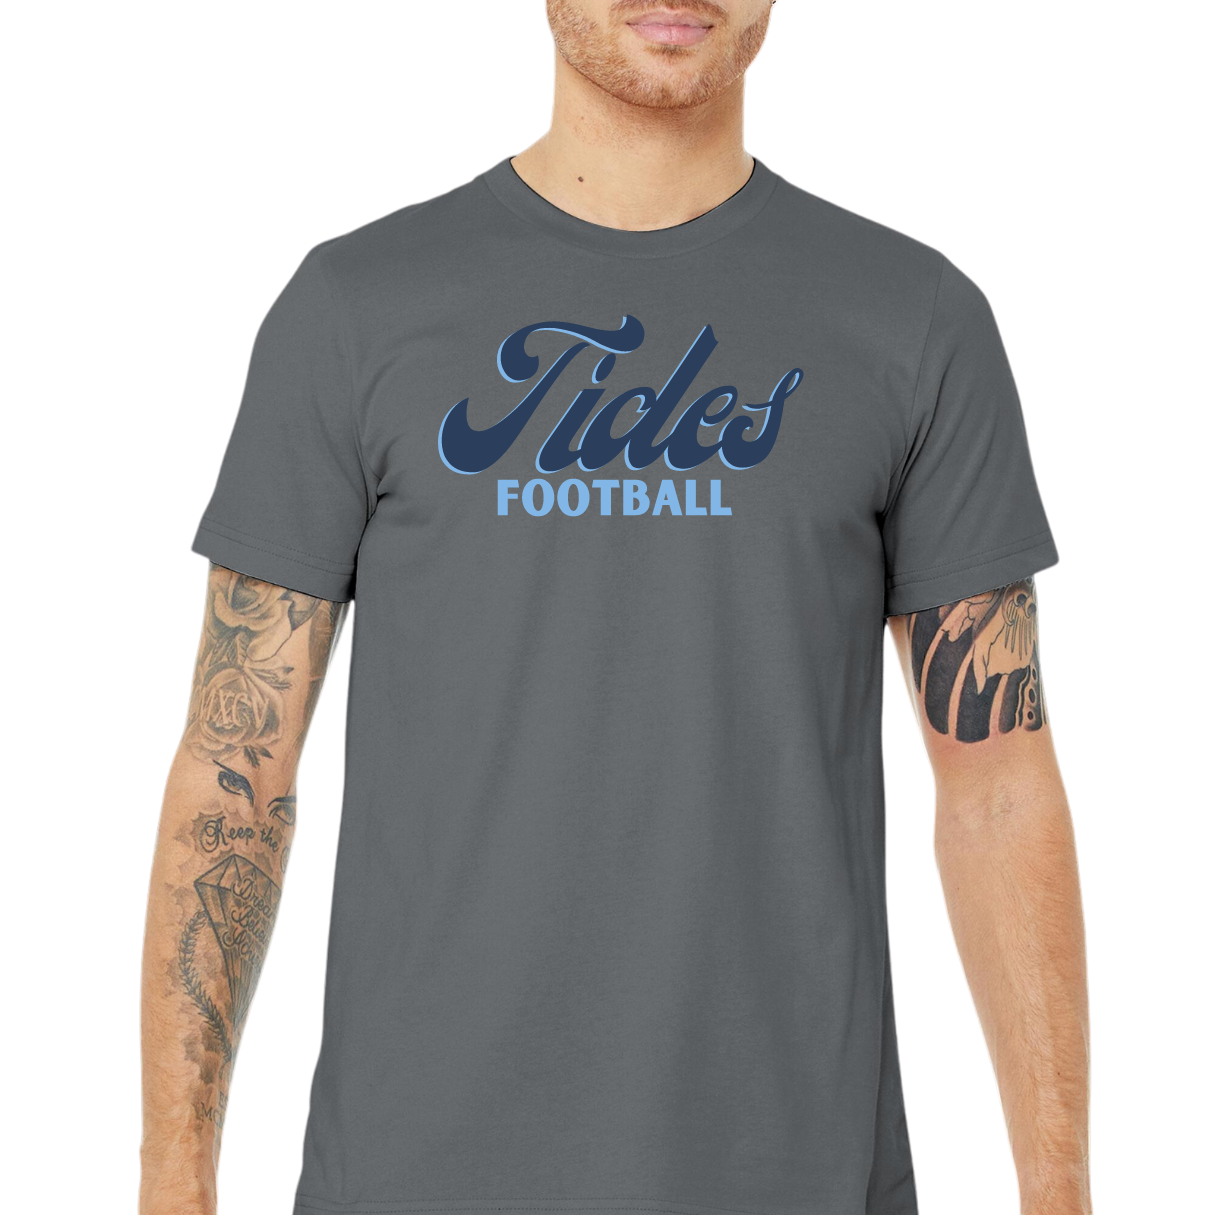 Retro Tides Football Tee- Adult and Youth